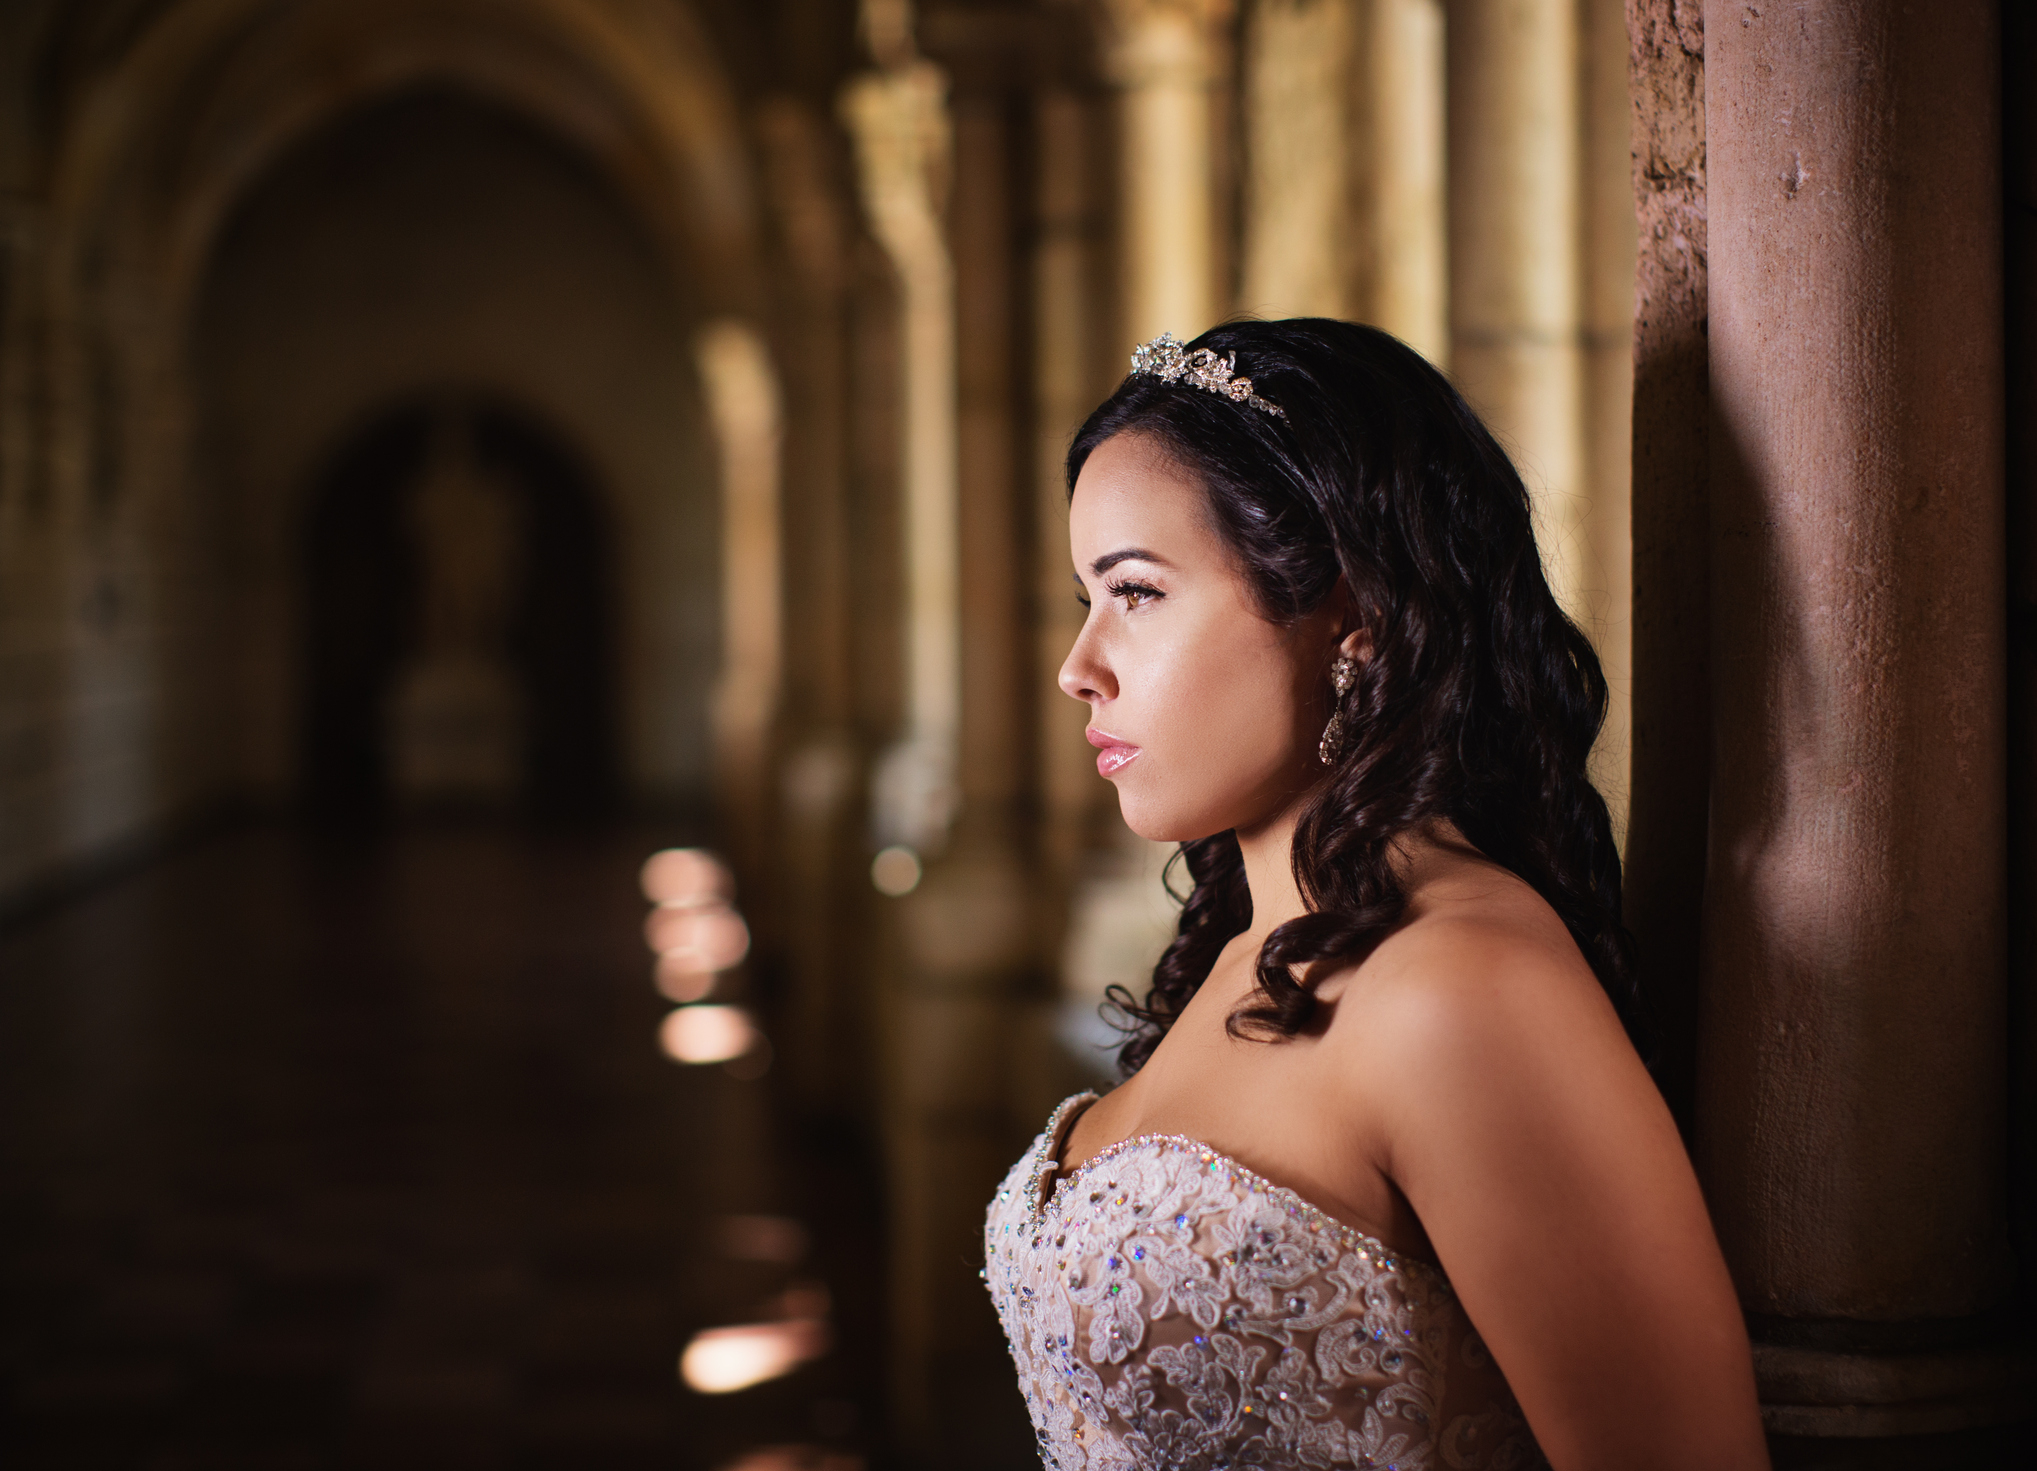 A girl on her quinceañera day looking pensive